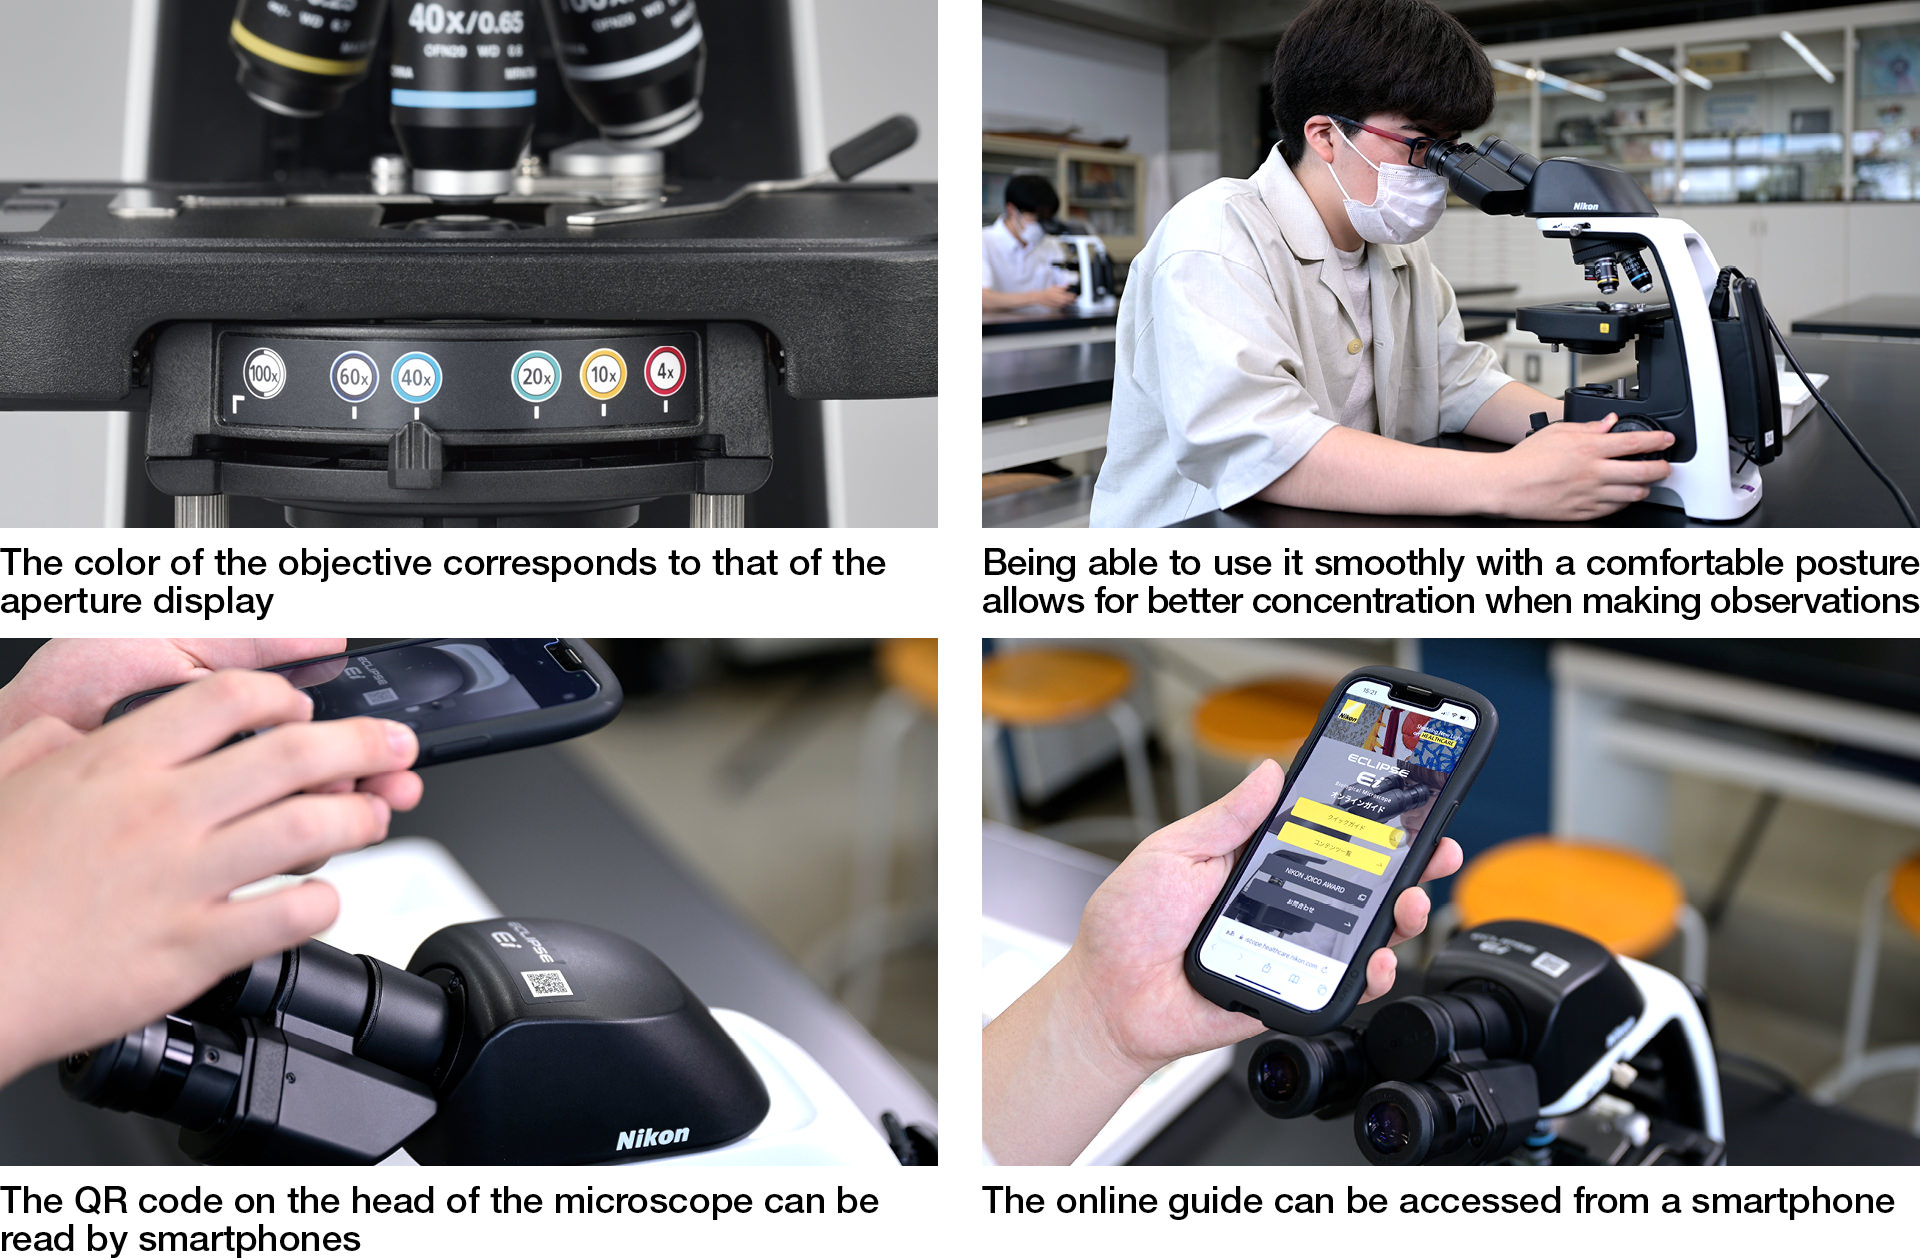 The color of the objective corresponds to that of the aperture display/Being able to use it smoothly with a comfortable posture allows for better concentration when making observations/The QR code on the head of the microscope can be read by smartphones/The online guide can be accessed from a smartphone